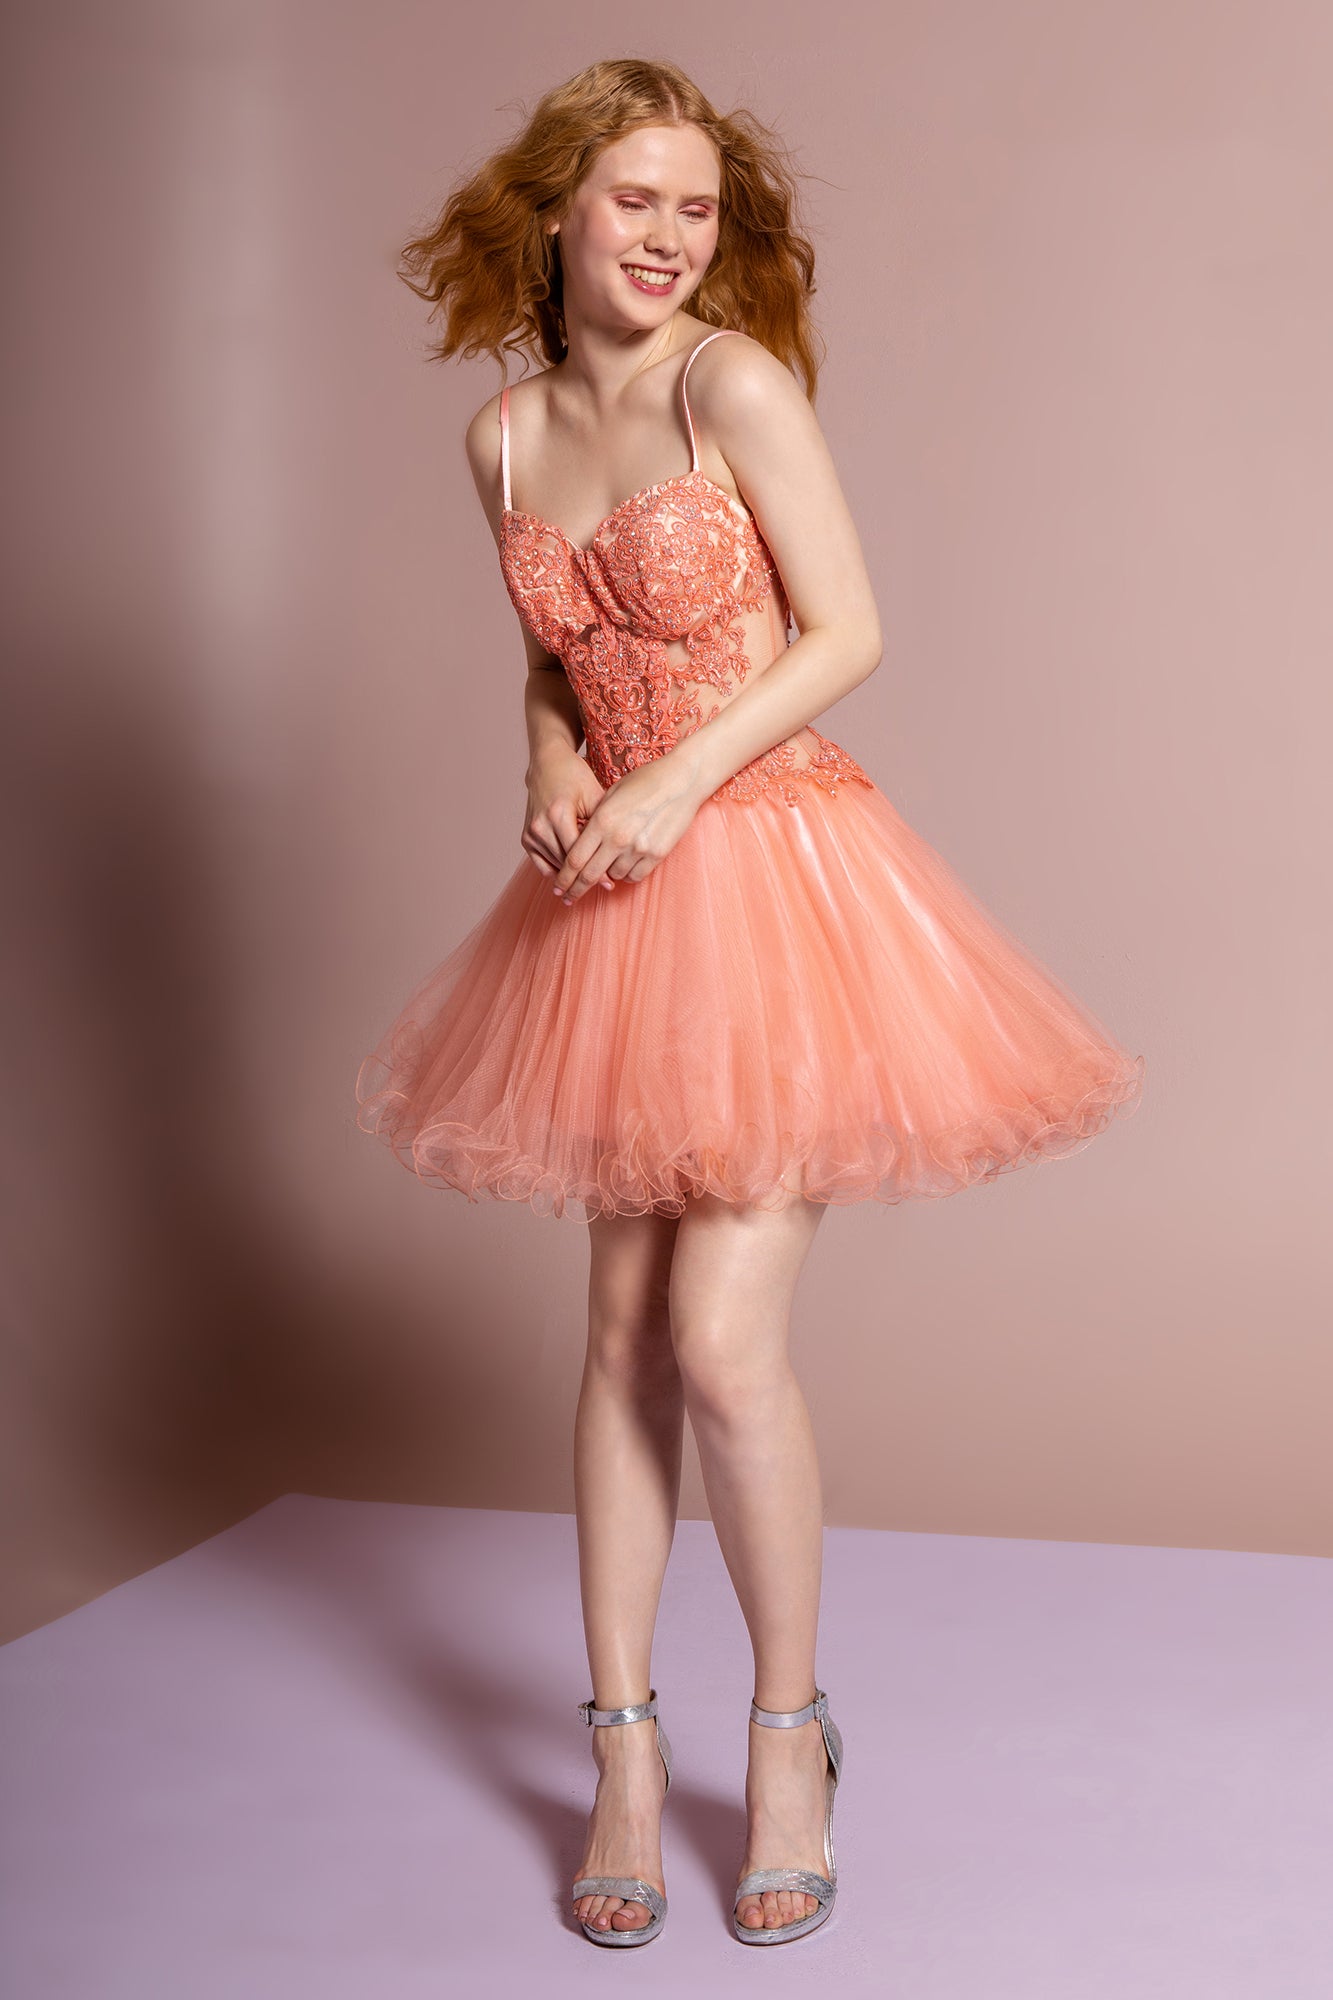 Spaghetti Straps Short Tulle Dress with Lace Bodice-smcdress